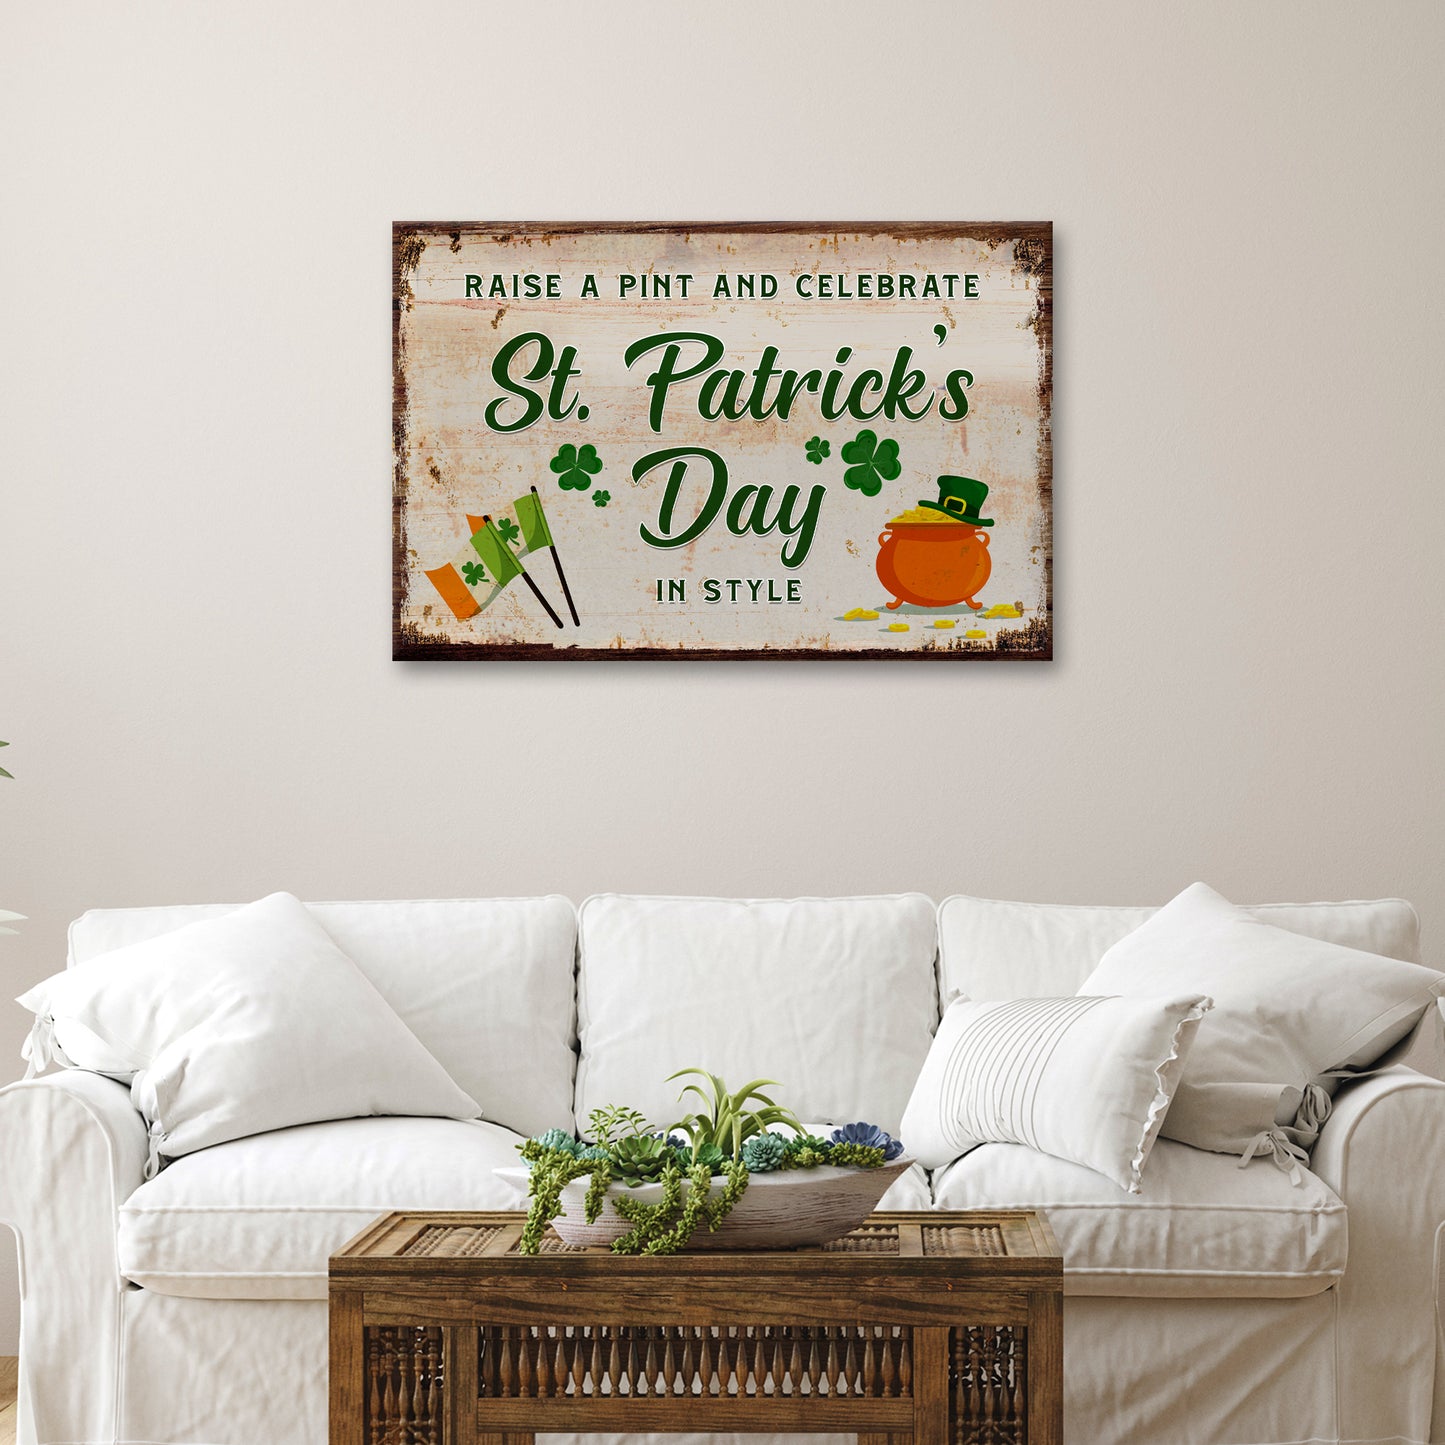 Raise A Pint And Celebrate St. Patrick's Day In Style Sign - Image by Tailored Canvases